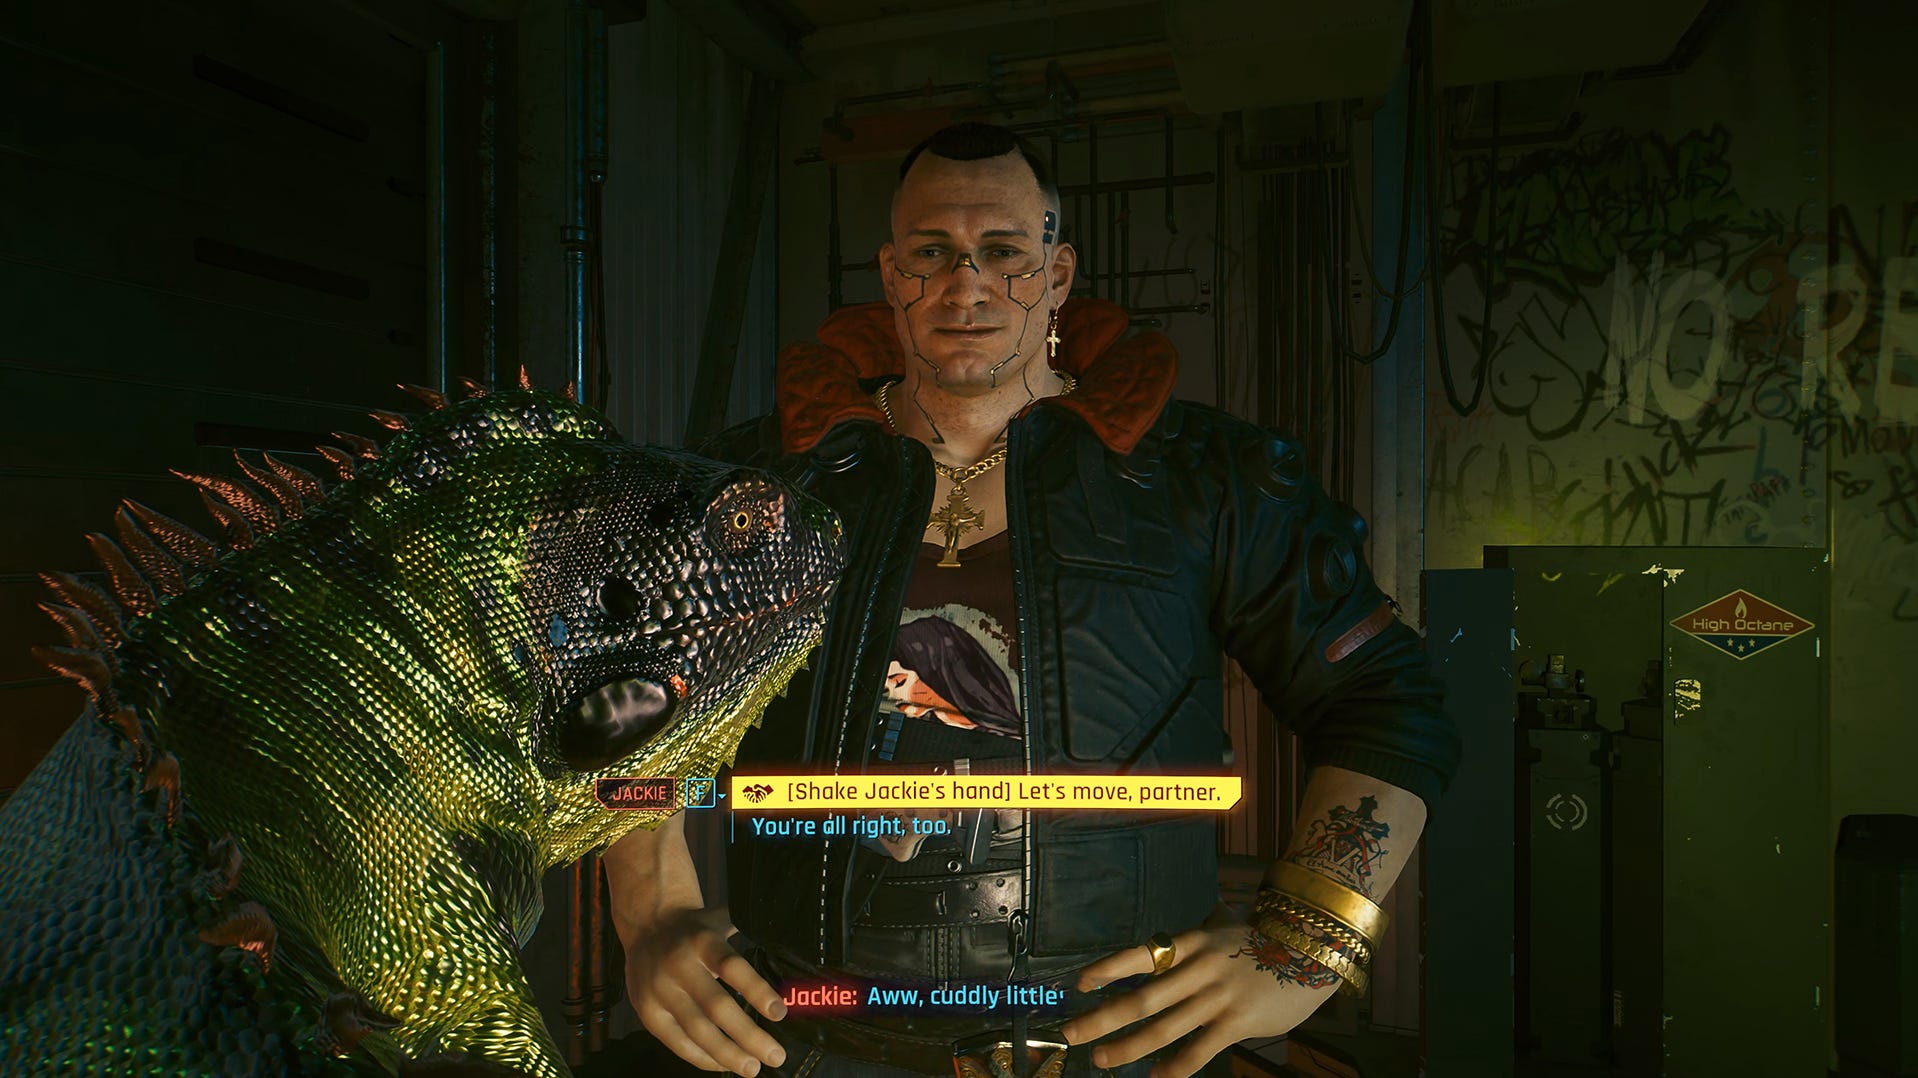 an image of "Cyberpunk 2077" gameplay using NVIDIA GeForce NOW Ultimate cloud gaming.